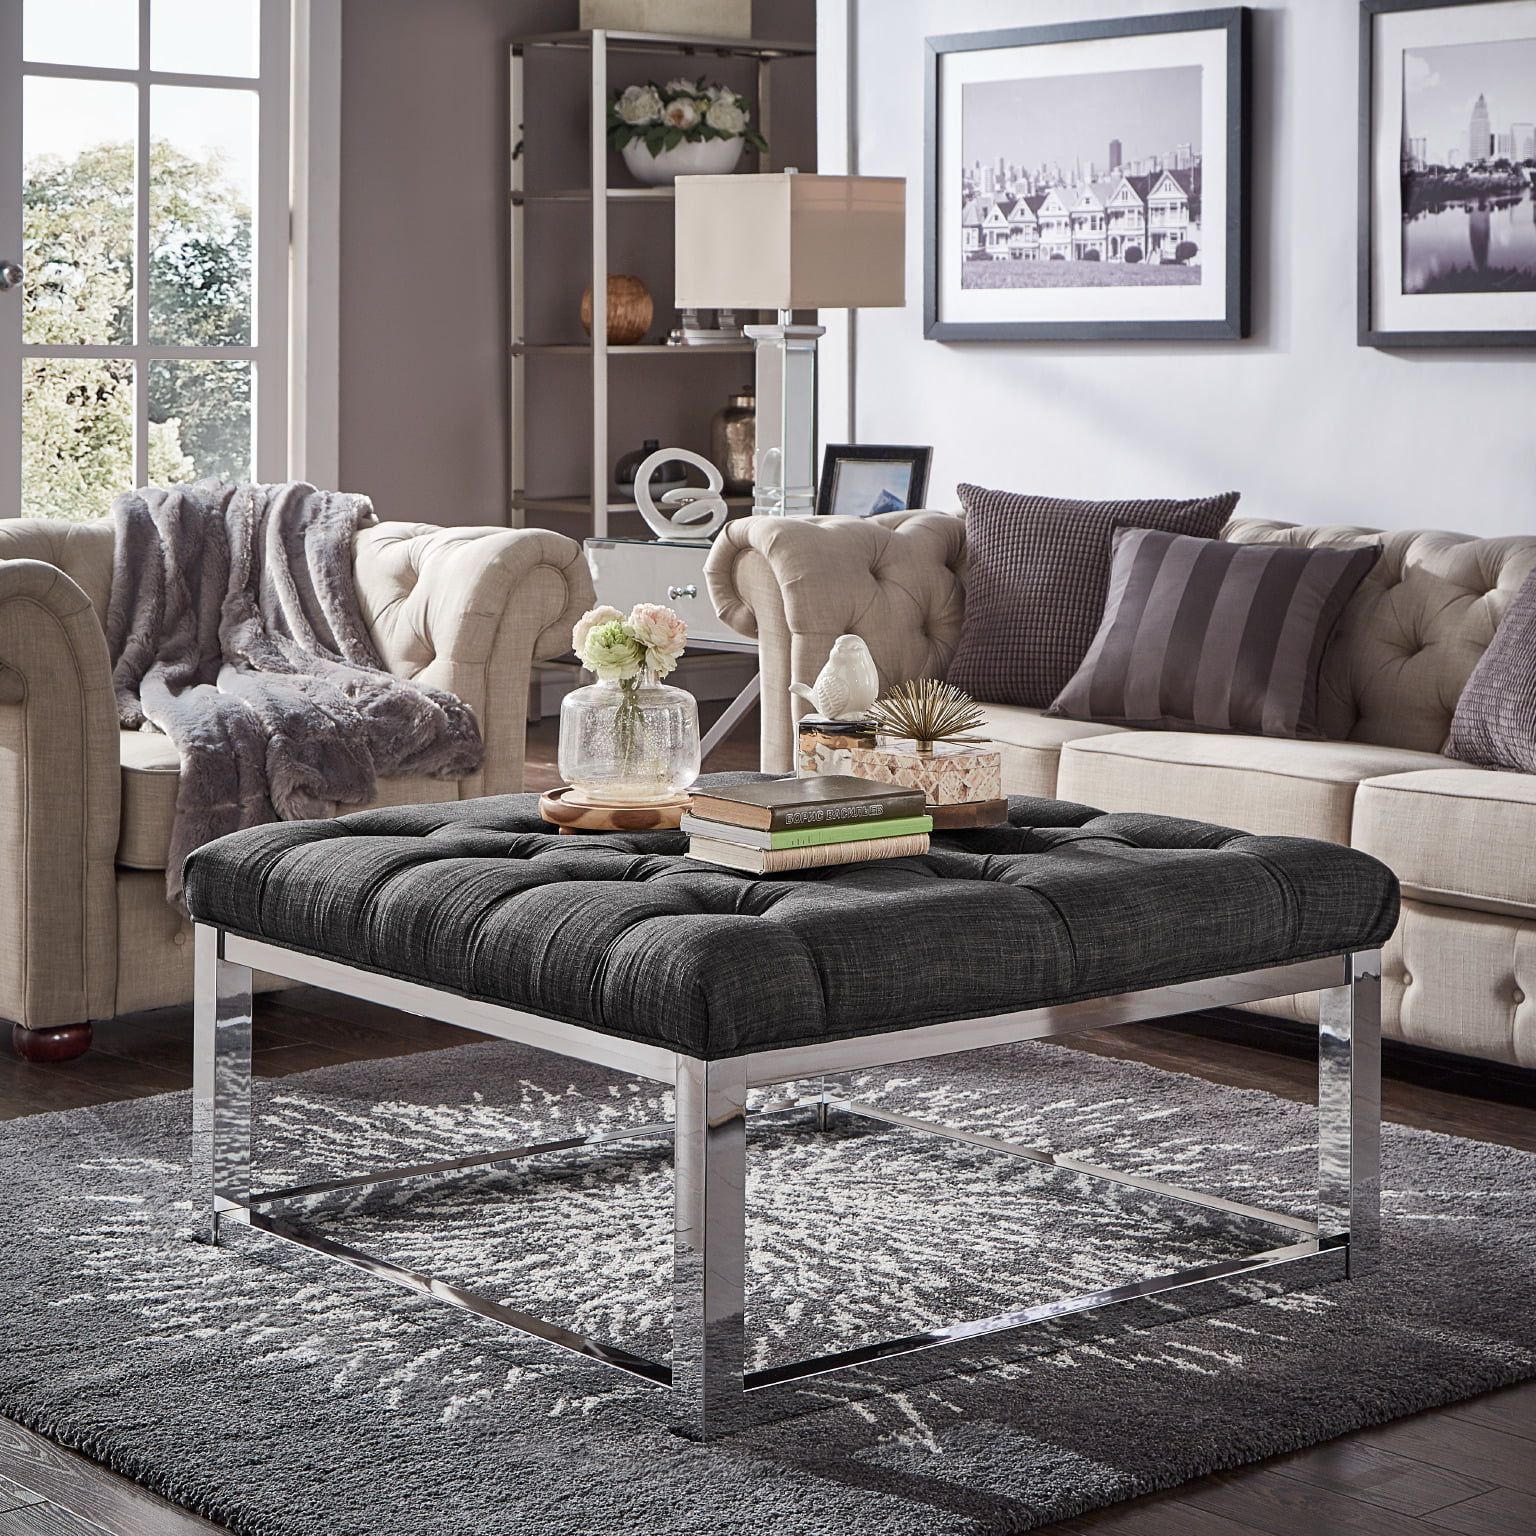 Weston Home Libby Button Tufted Cushion Ottoman Coffee Table With Throughout Chrome Metal Ottomans (View 2 of 20)